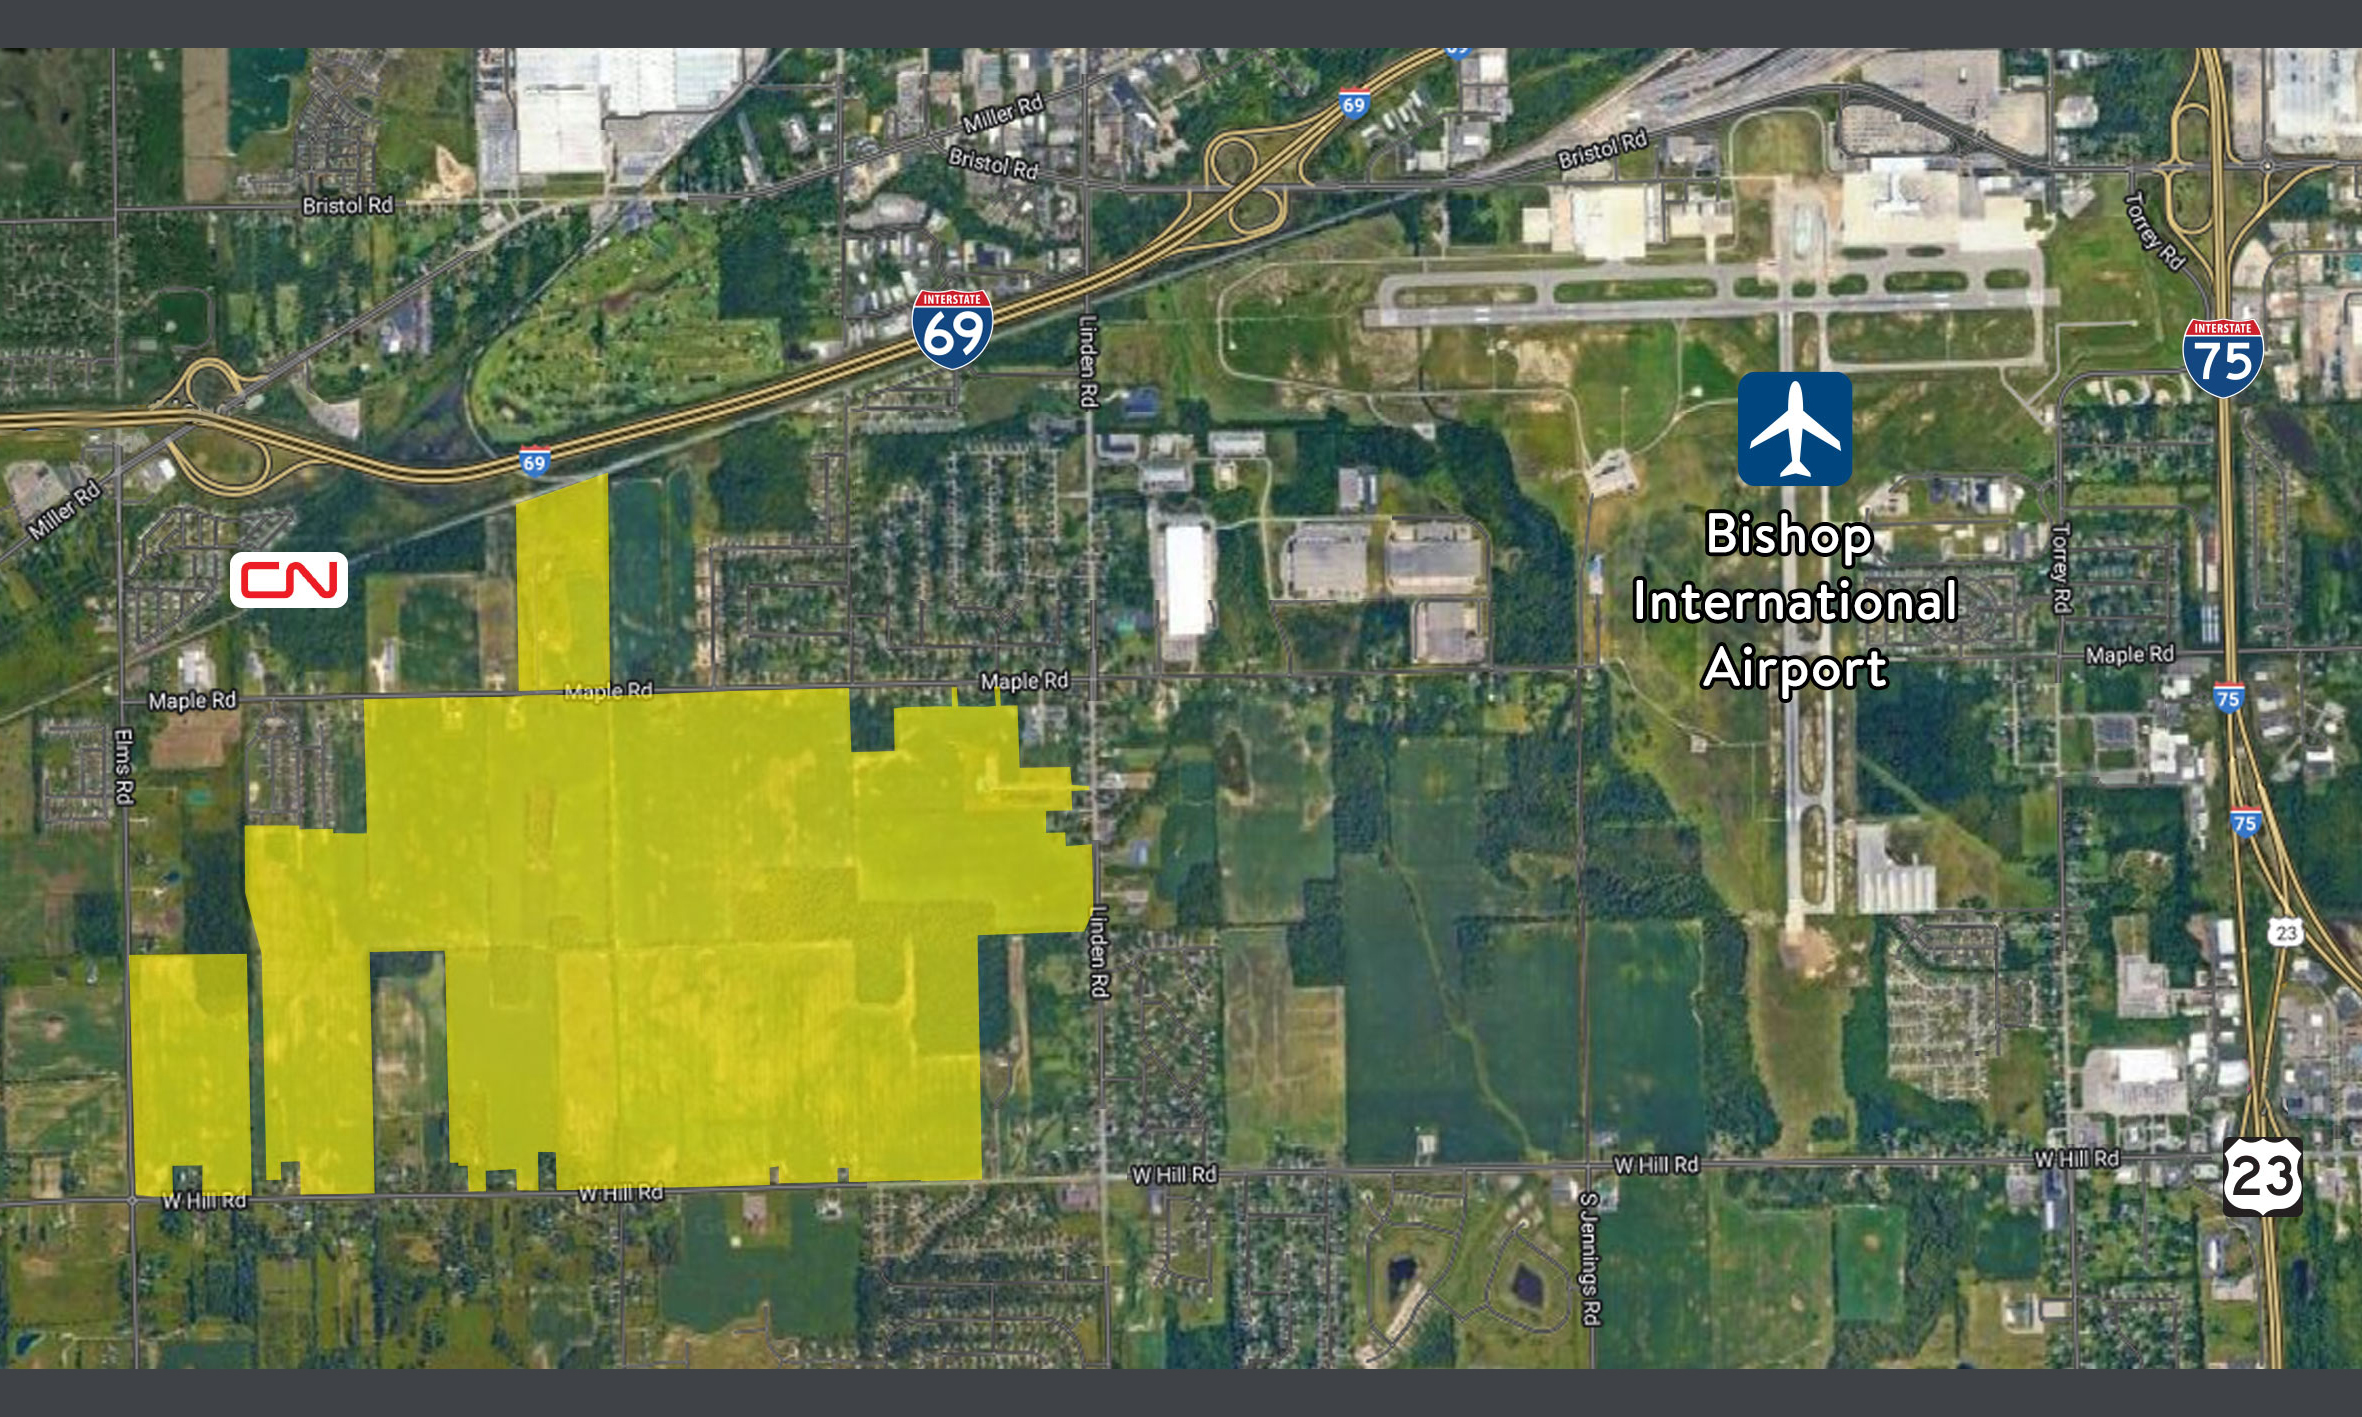 Satellite image with the Advanced Manufacturing District of Genesee County, located in Mundy Township highlighted in yellow.